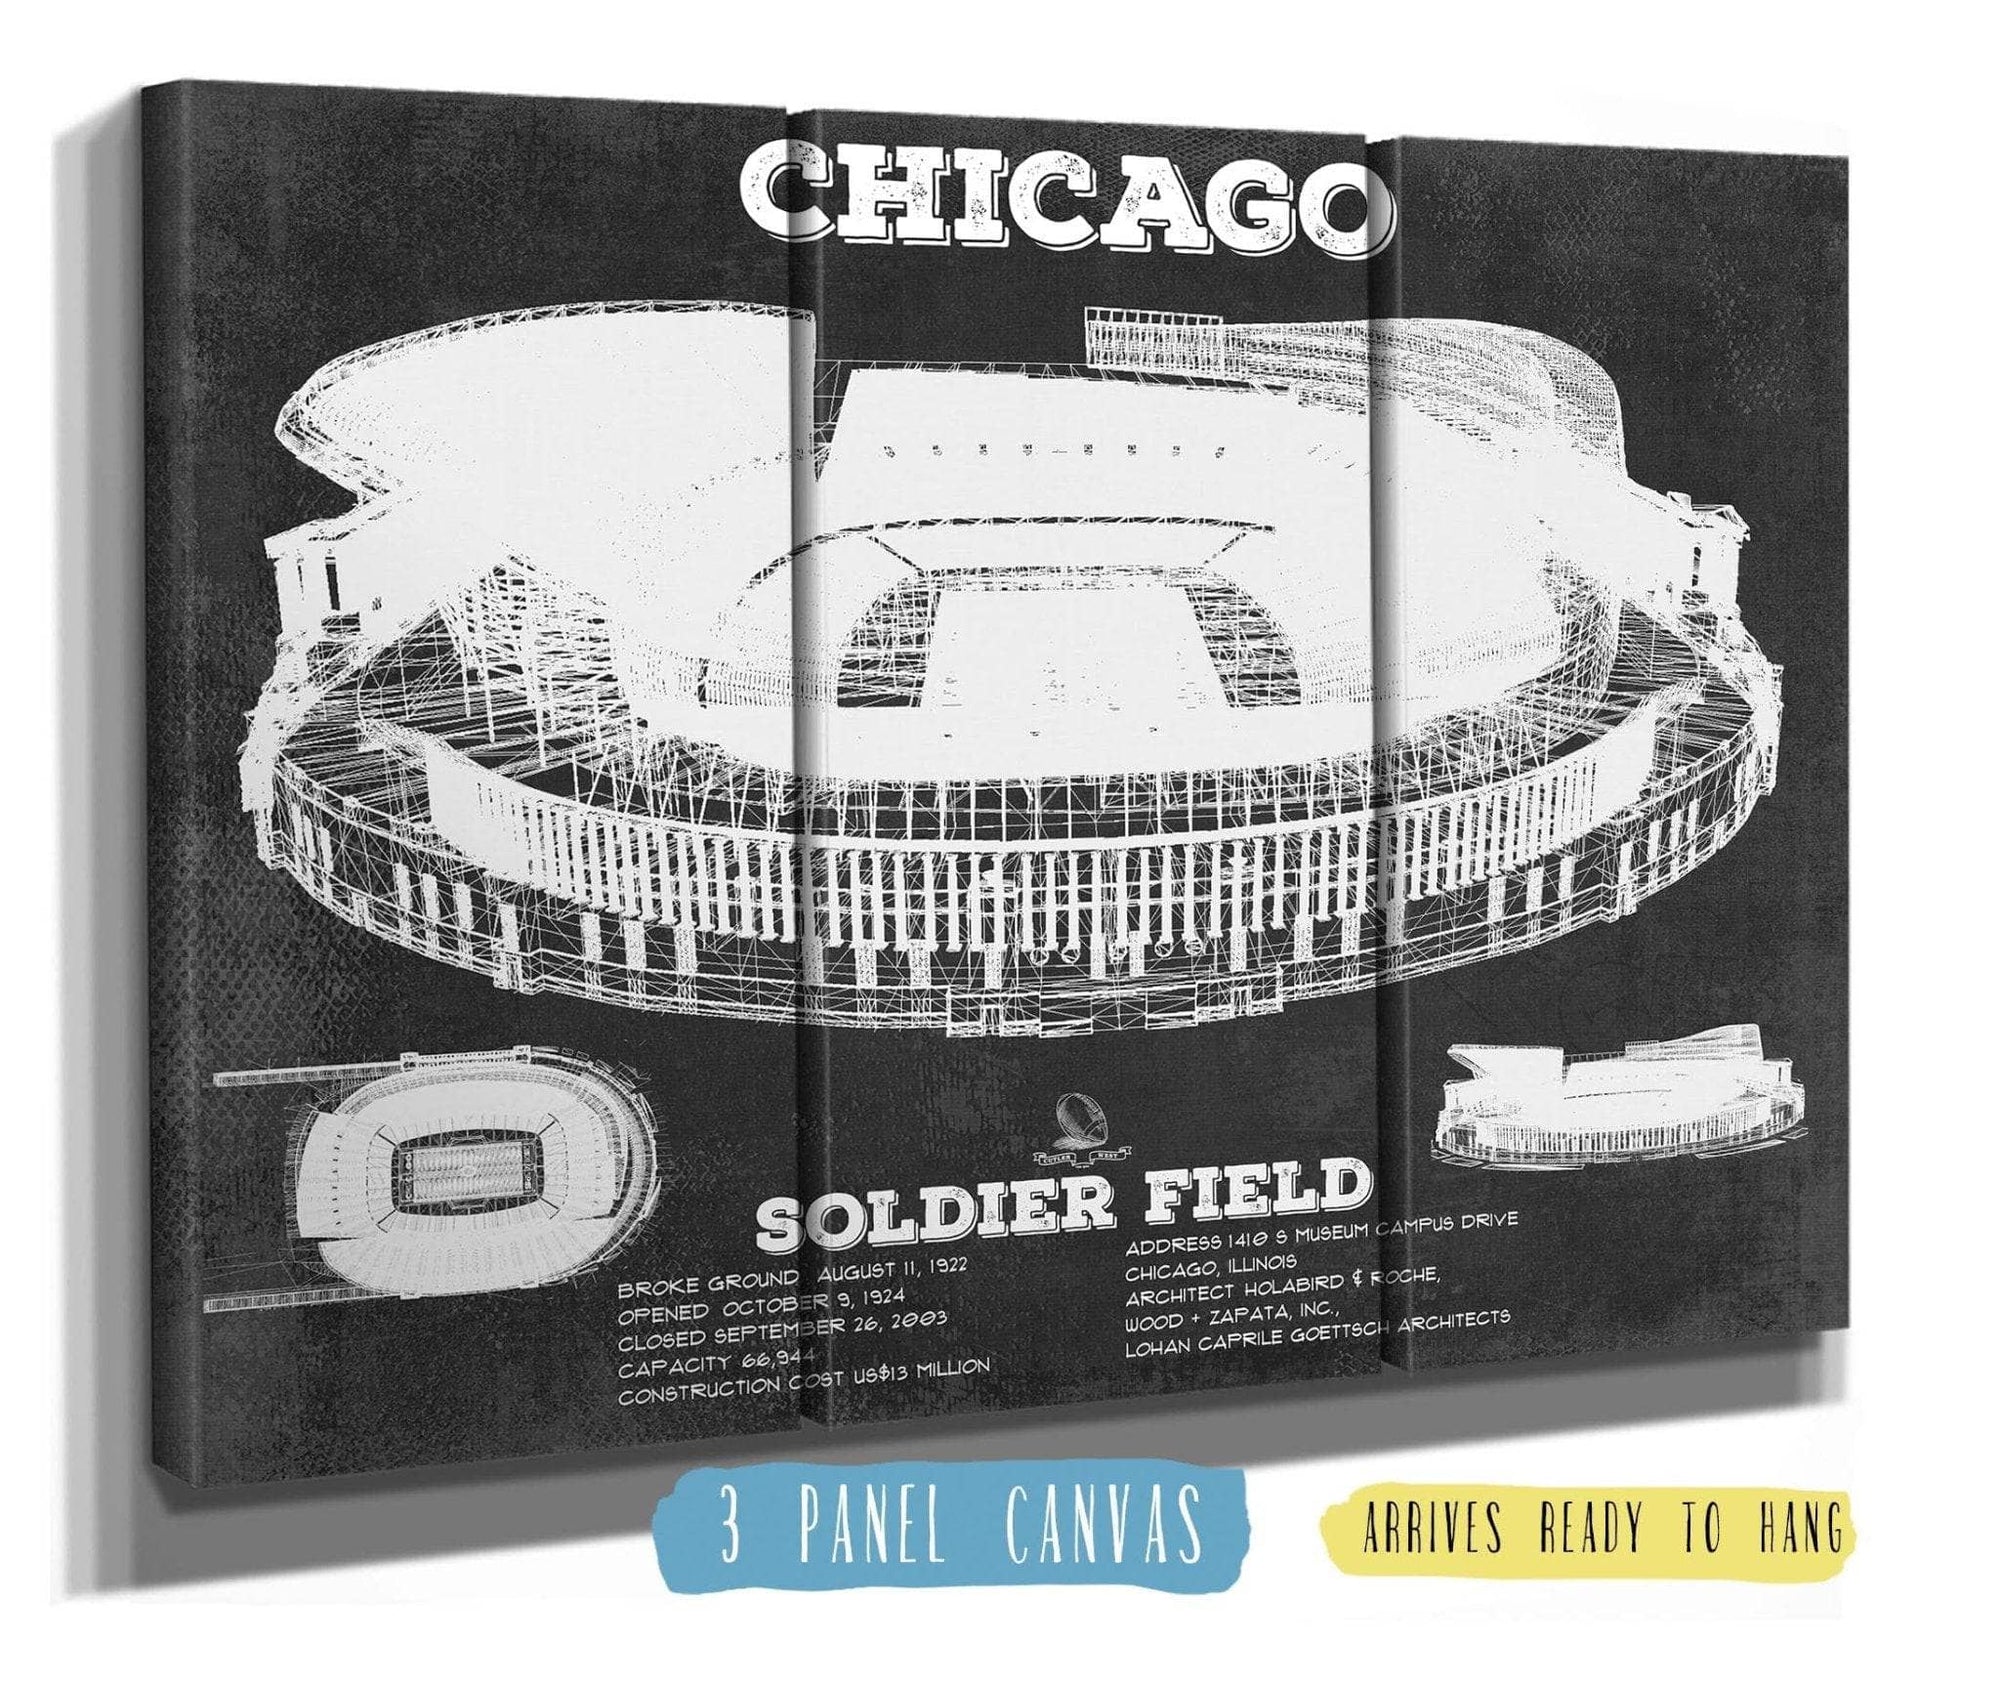 Cutler West Pro Football Collection 48" x 32" / 3 Panel Canvas Wrap Chicago Bears Stadium Seating Chart - Soldier Field - Vintage Football Print 635629280_28922